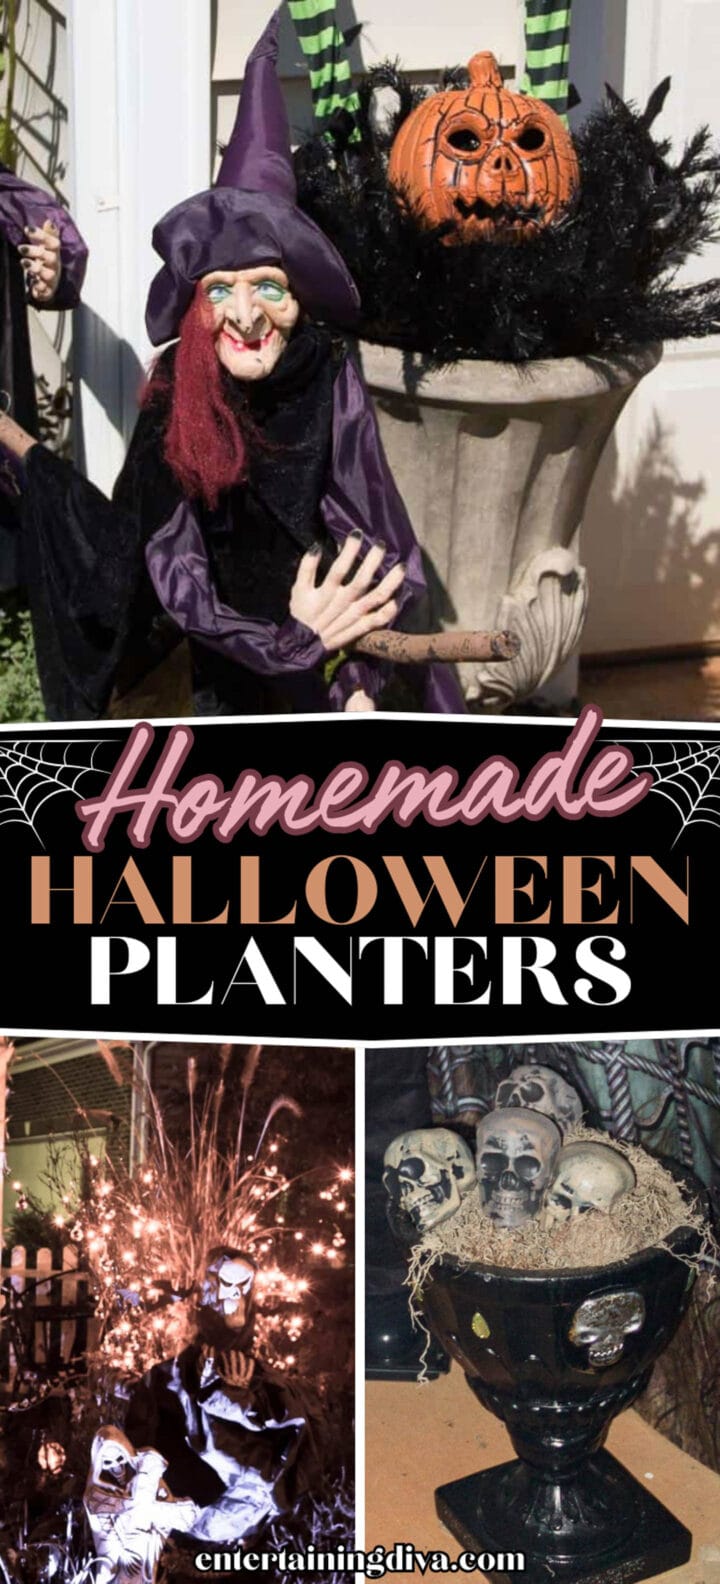 Halloween planters adorned with witches and skeletons.